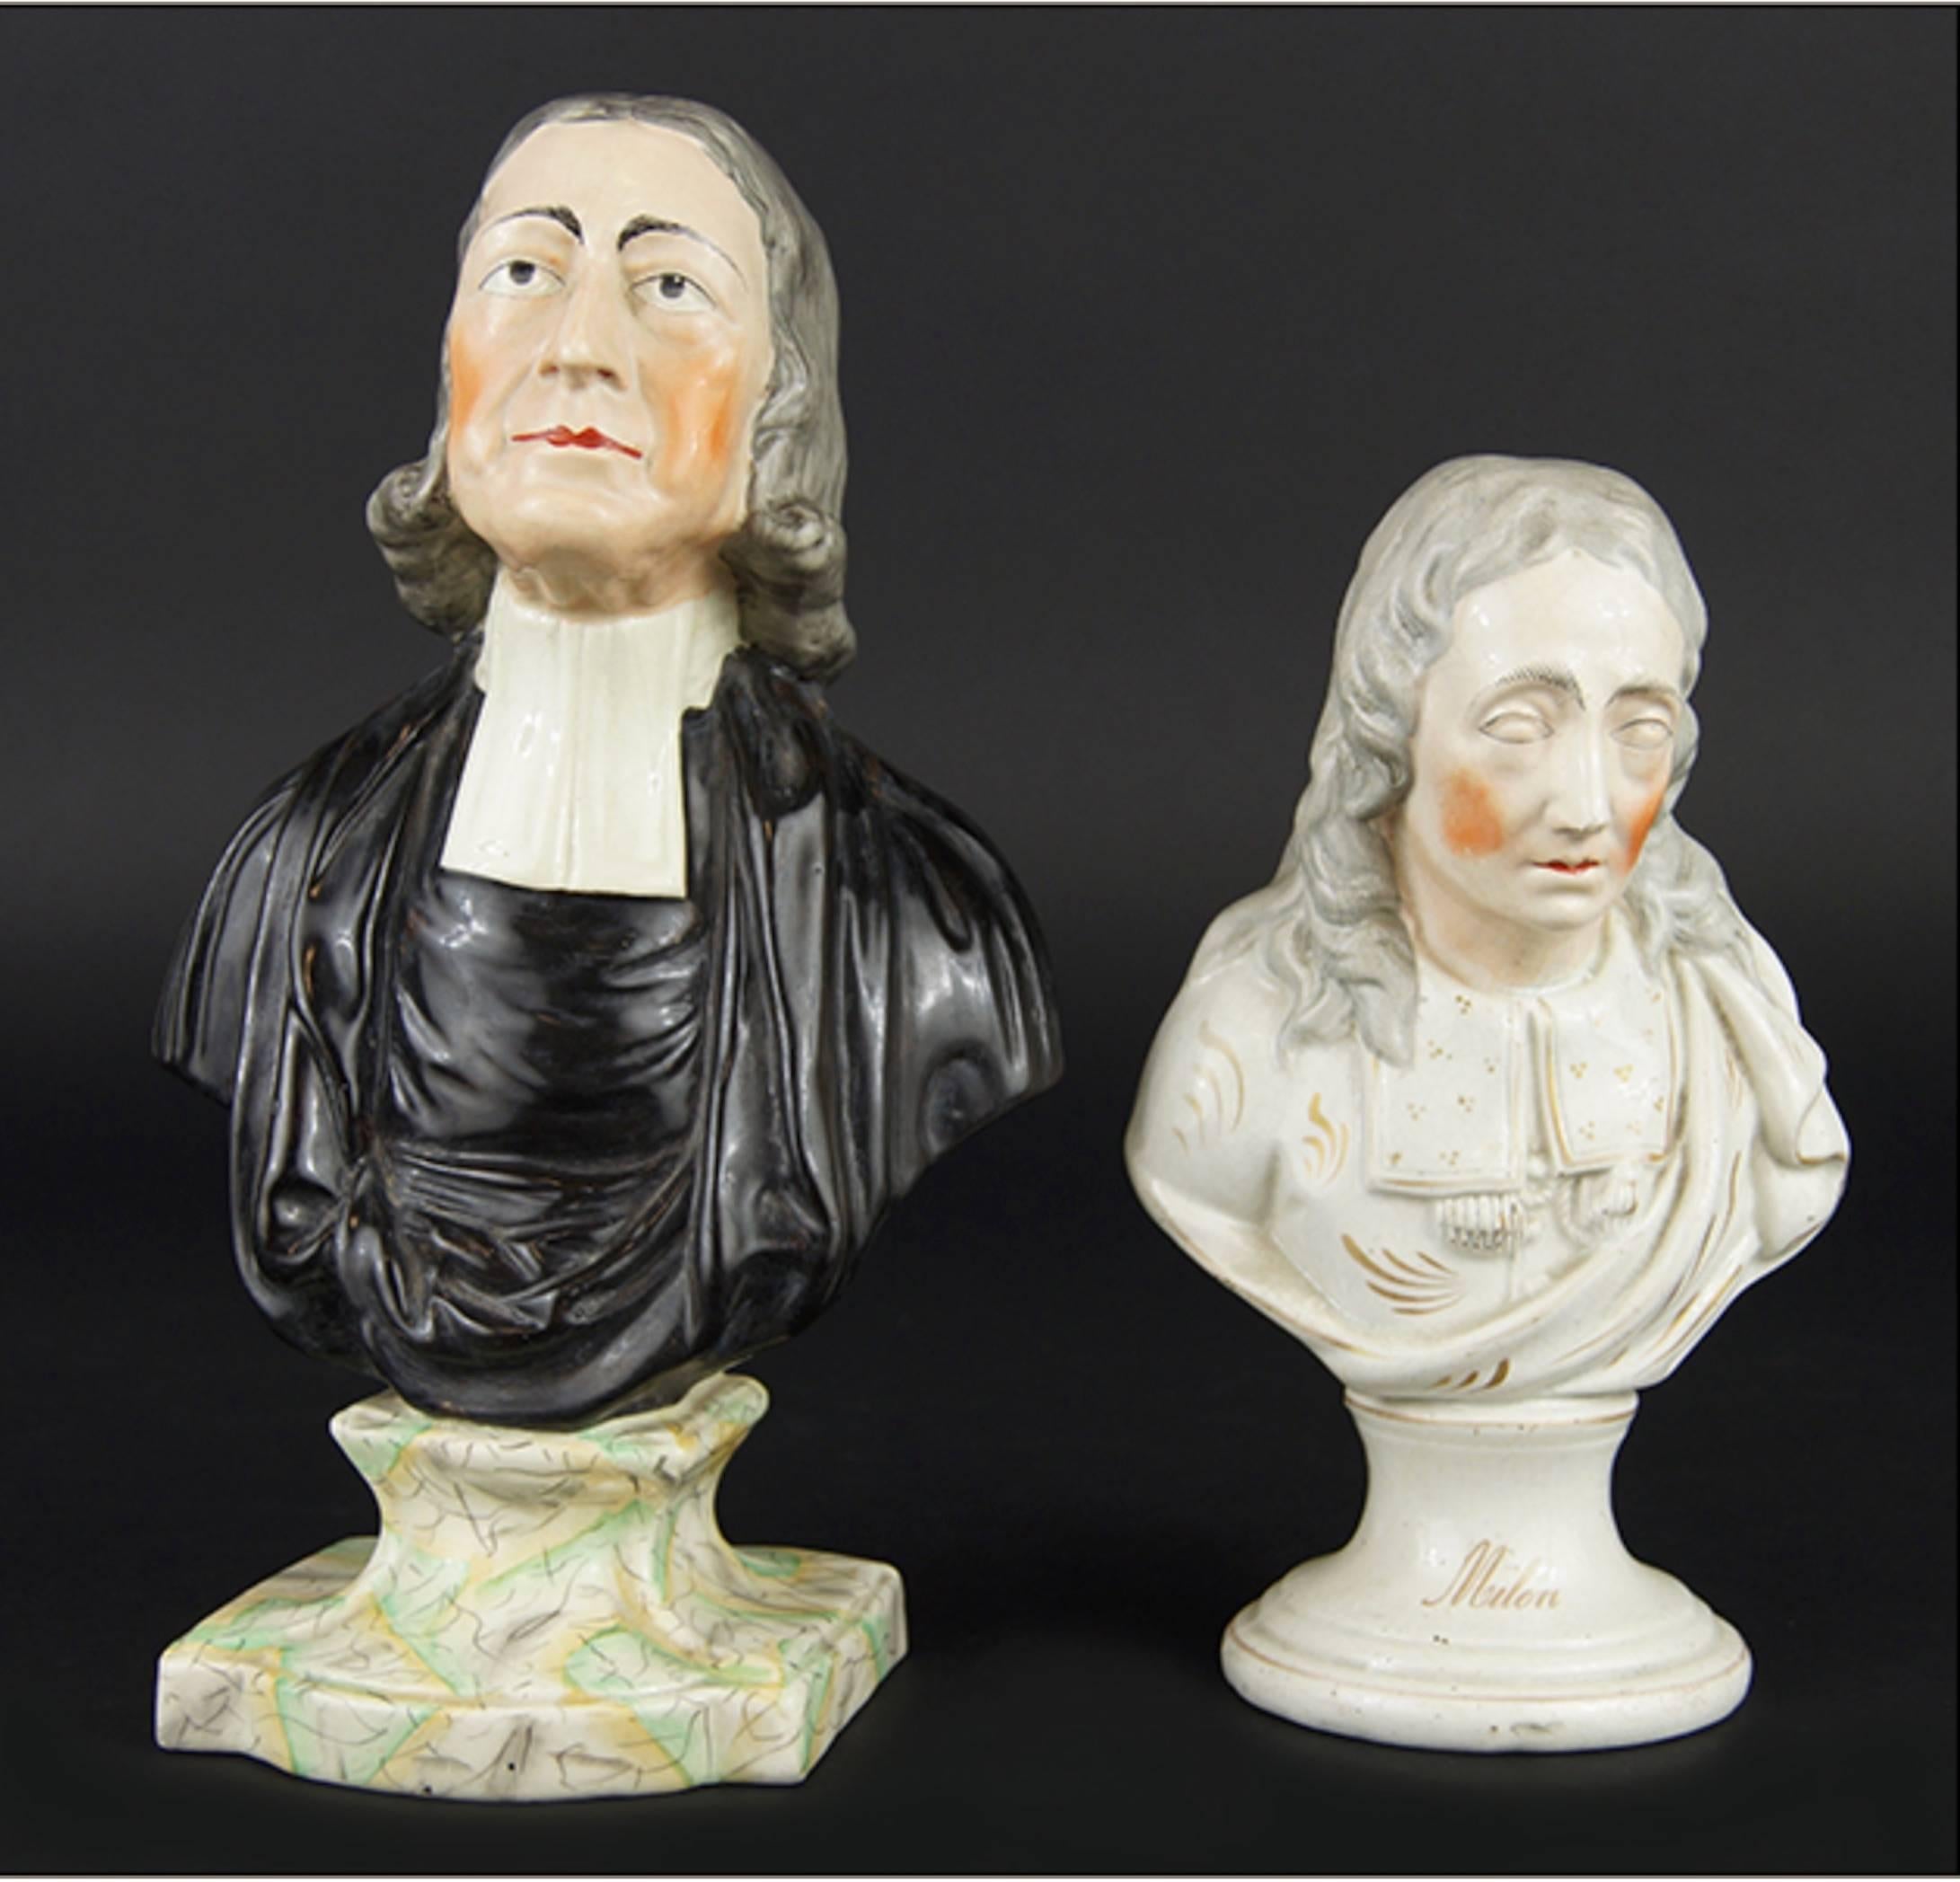 Handsome collection of seven 19th century English Staffordshire bust of gentlemen. Range of measurement from 7.5